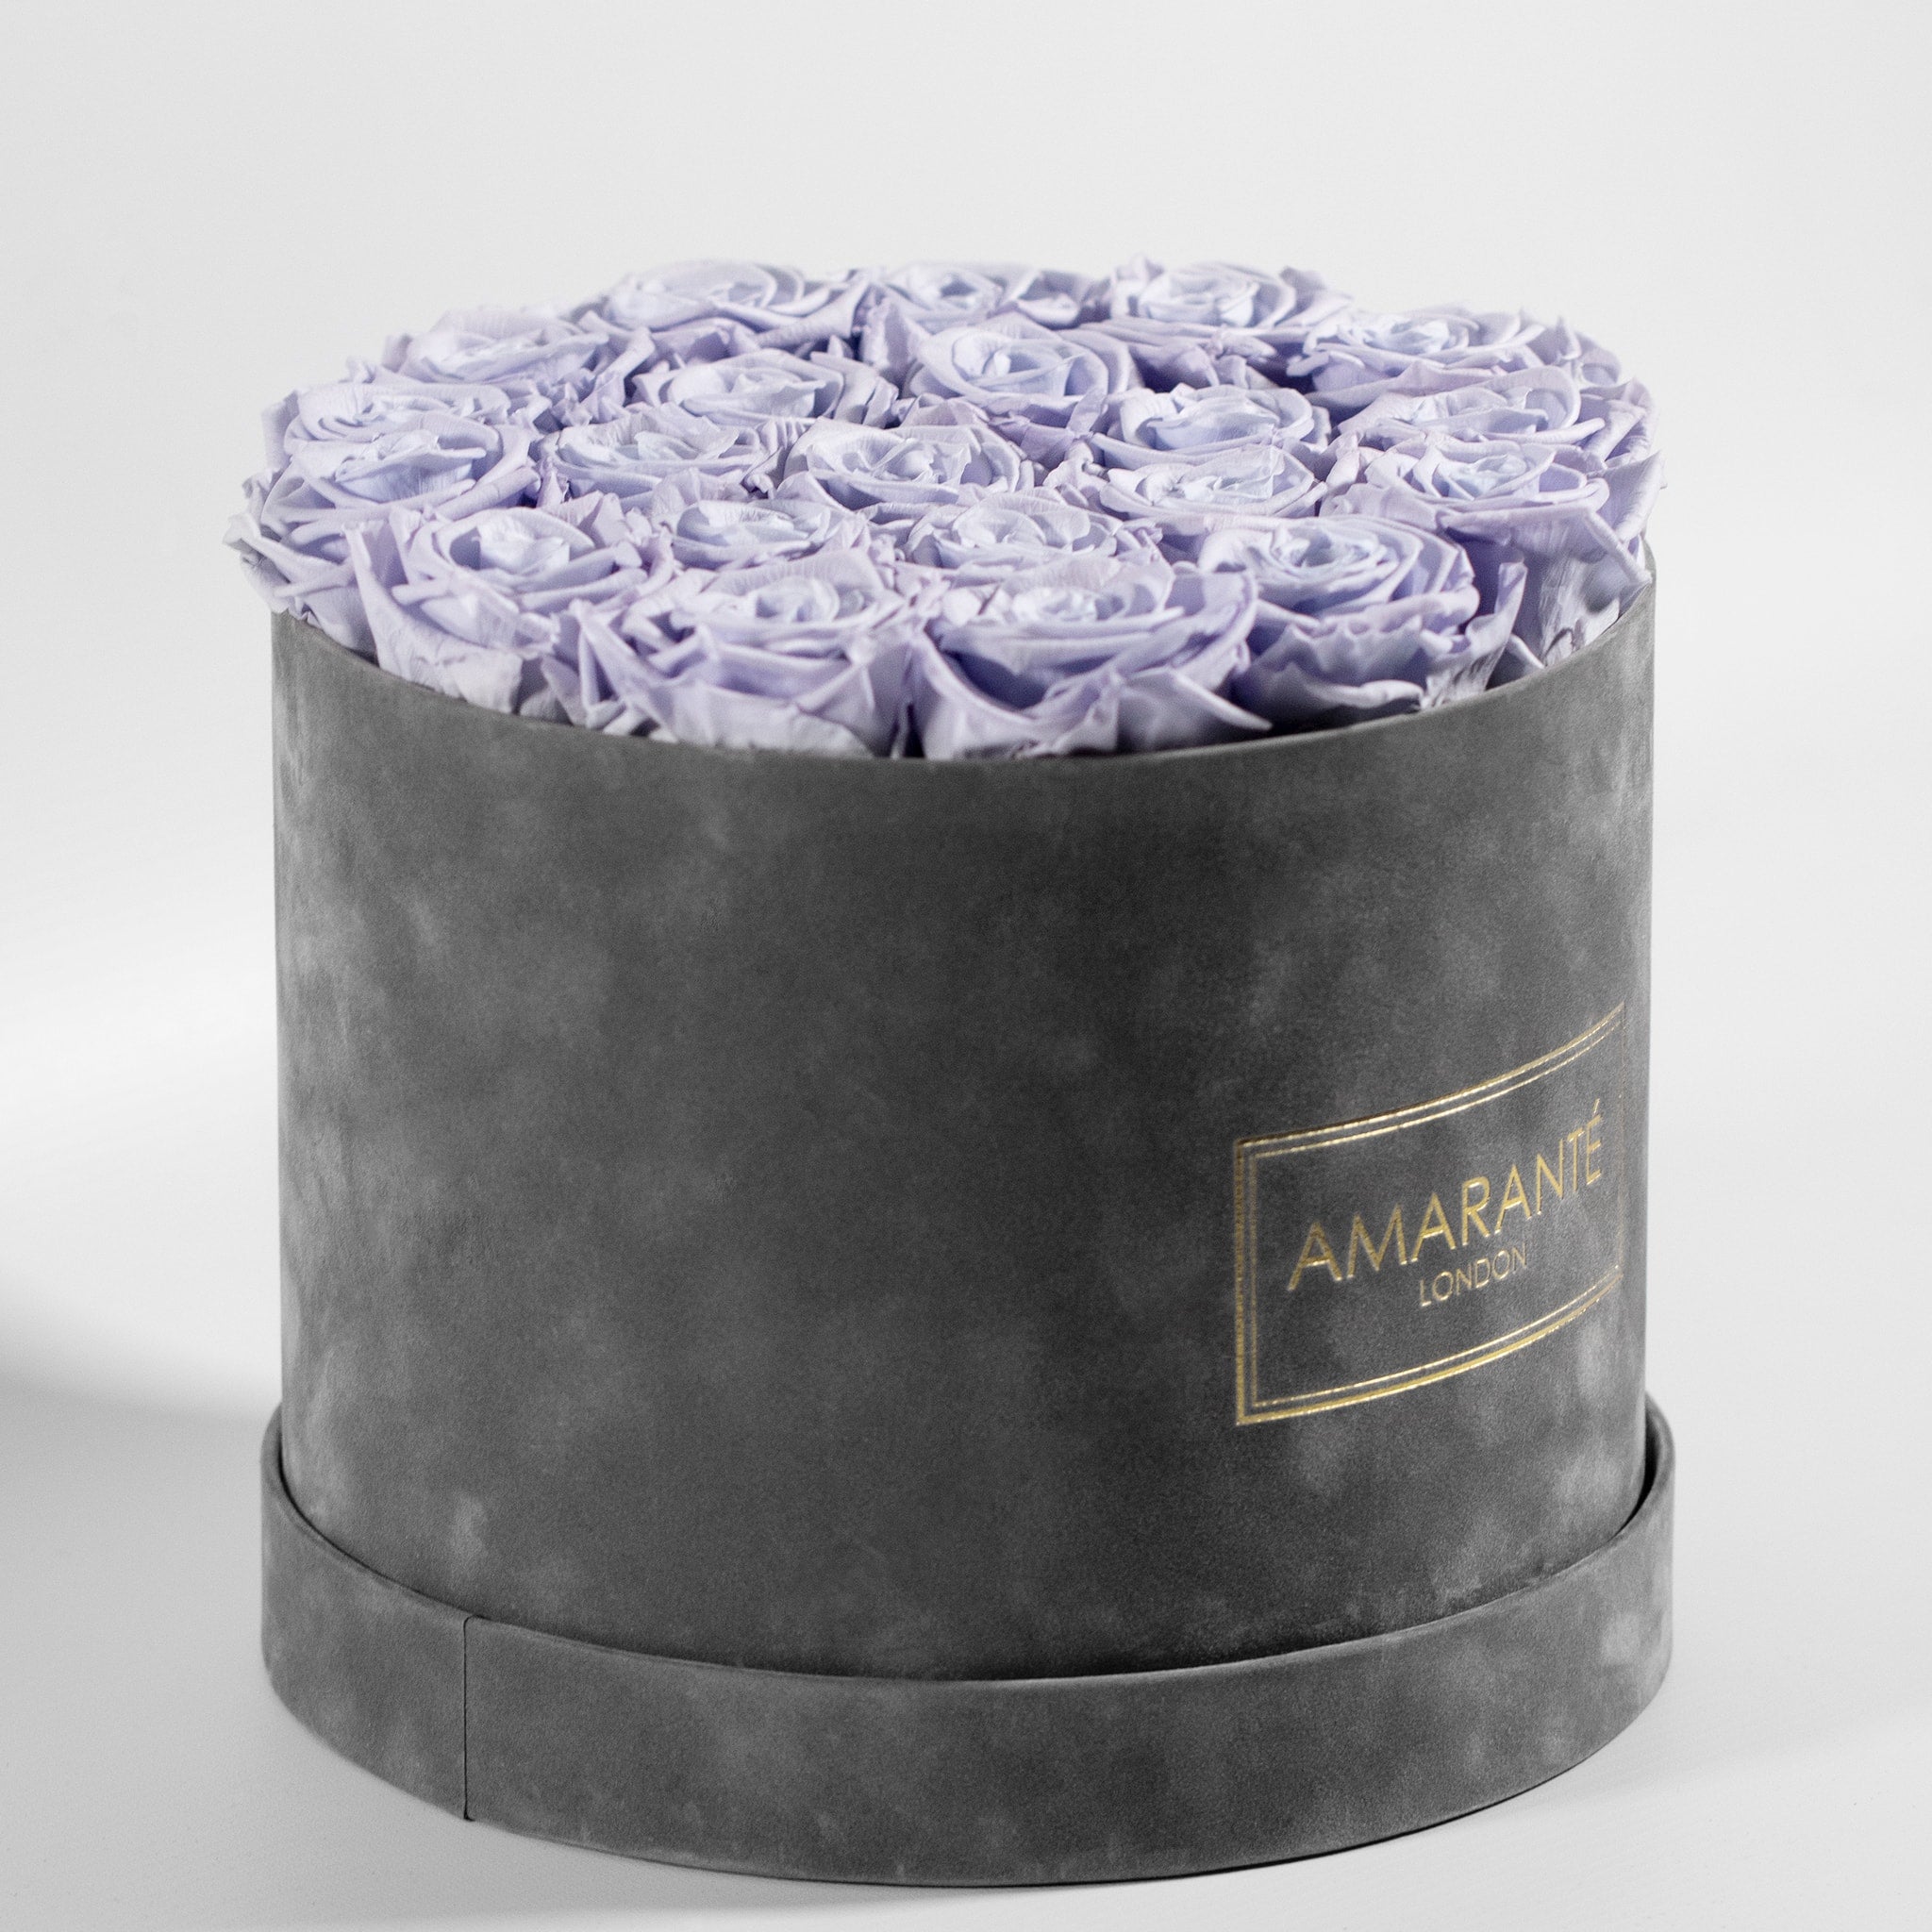 Spring-time inspired Lavender Roses available in a dreamy grey box 